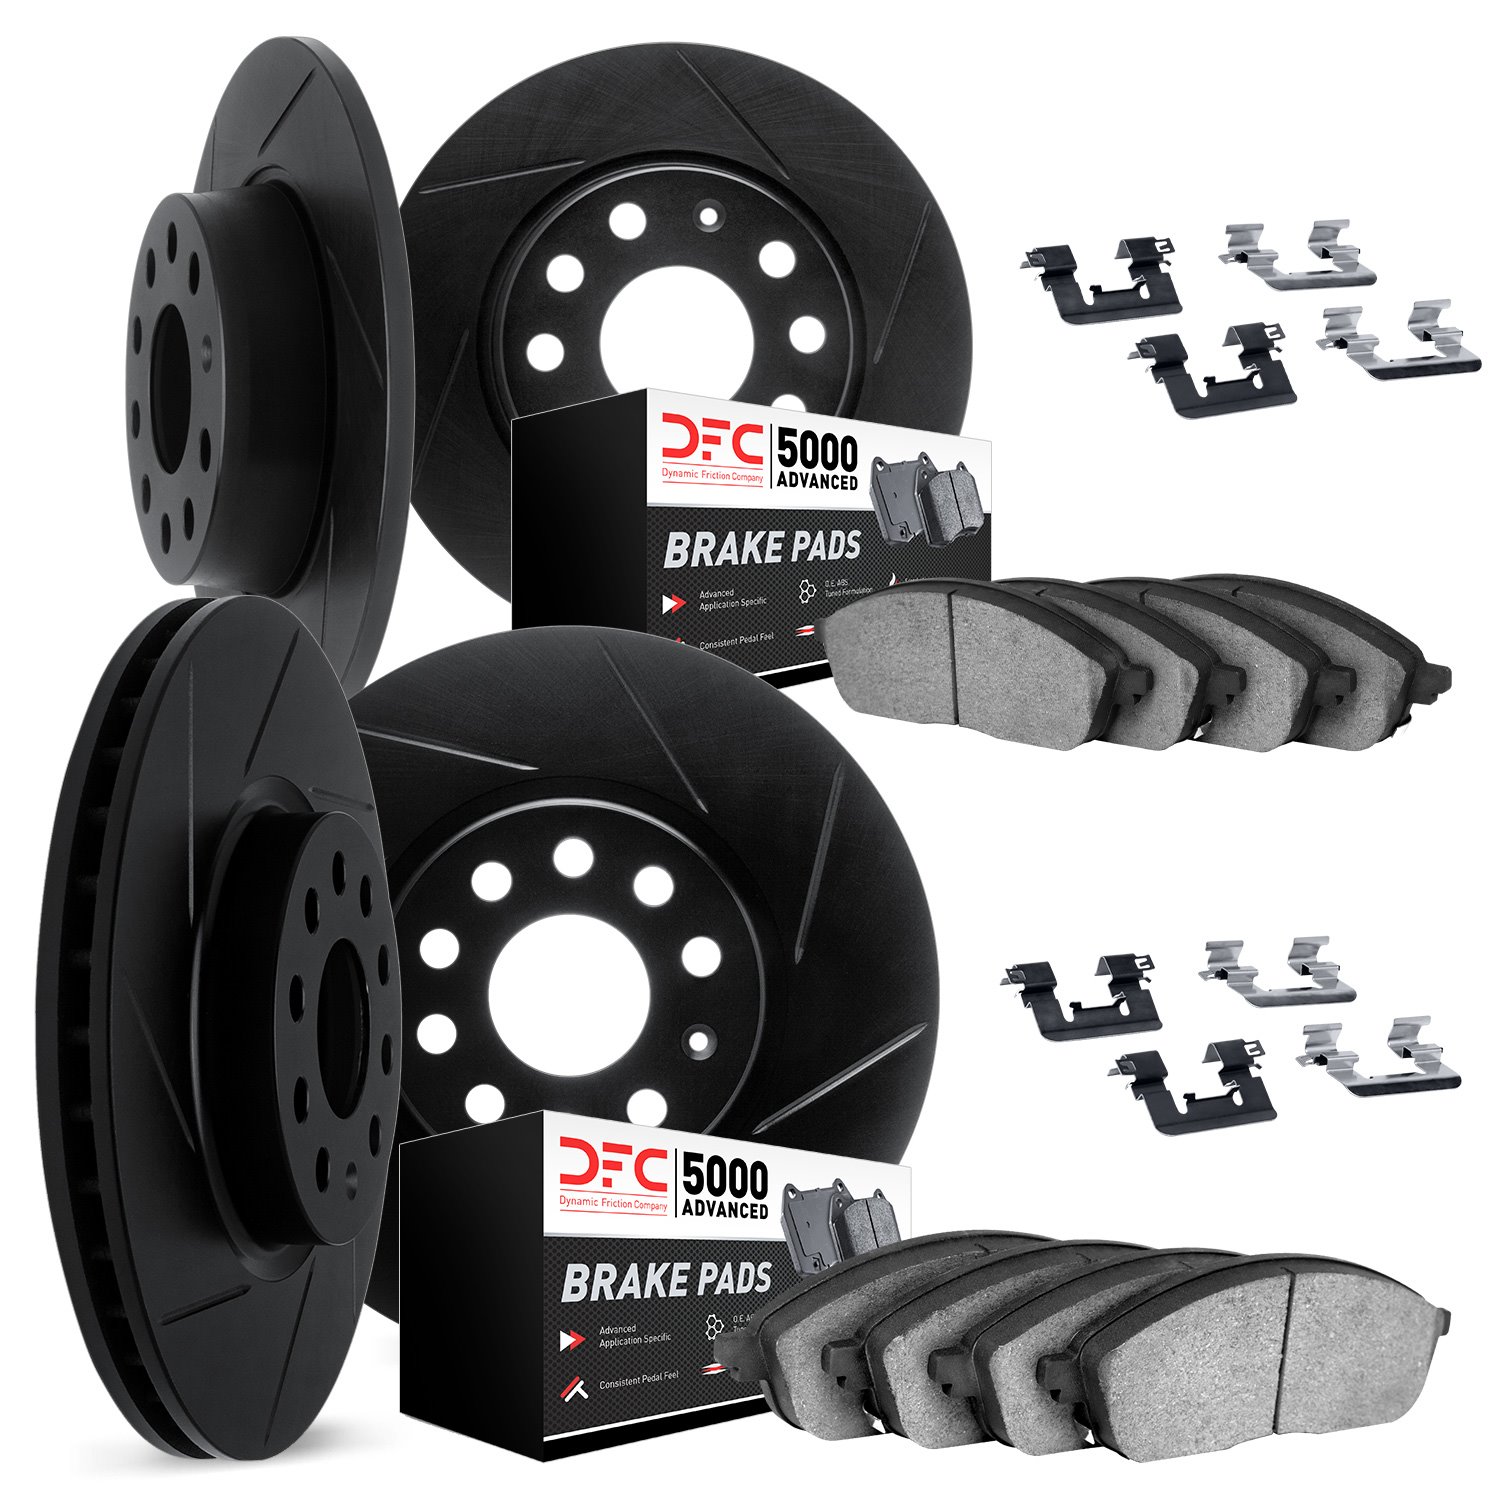 3514-59027 Slotted Brake Rotors w/5000 Advanced Brake Pads Kit & Hardware [Black], 2001-2002 Acura/Honda, Position: Front and Re